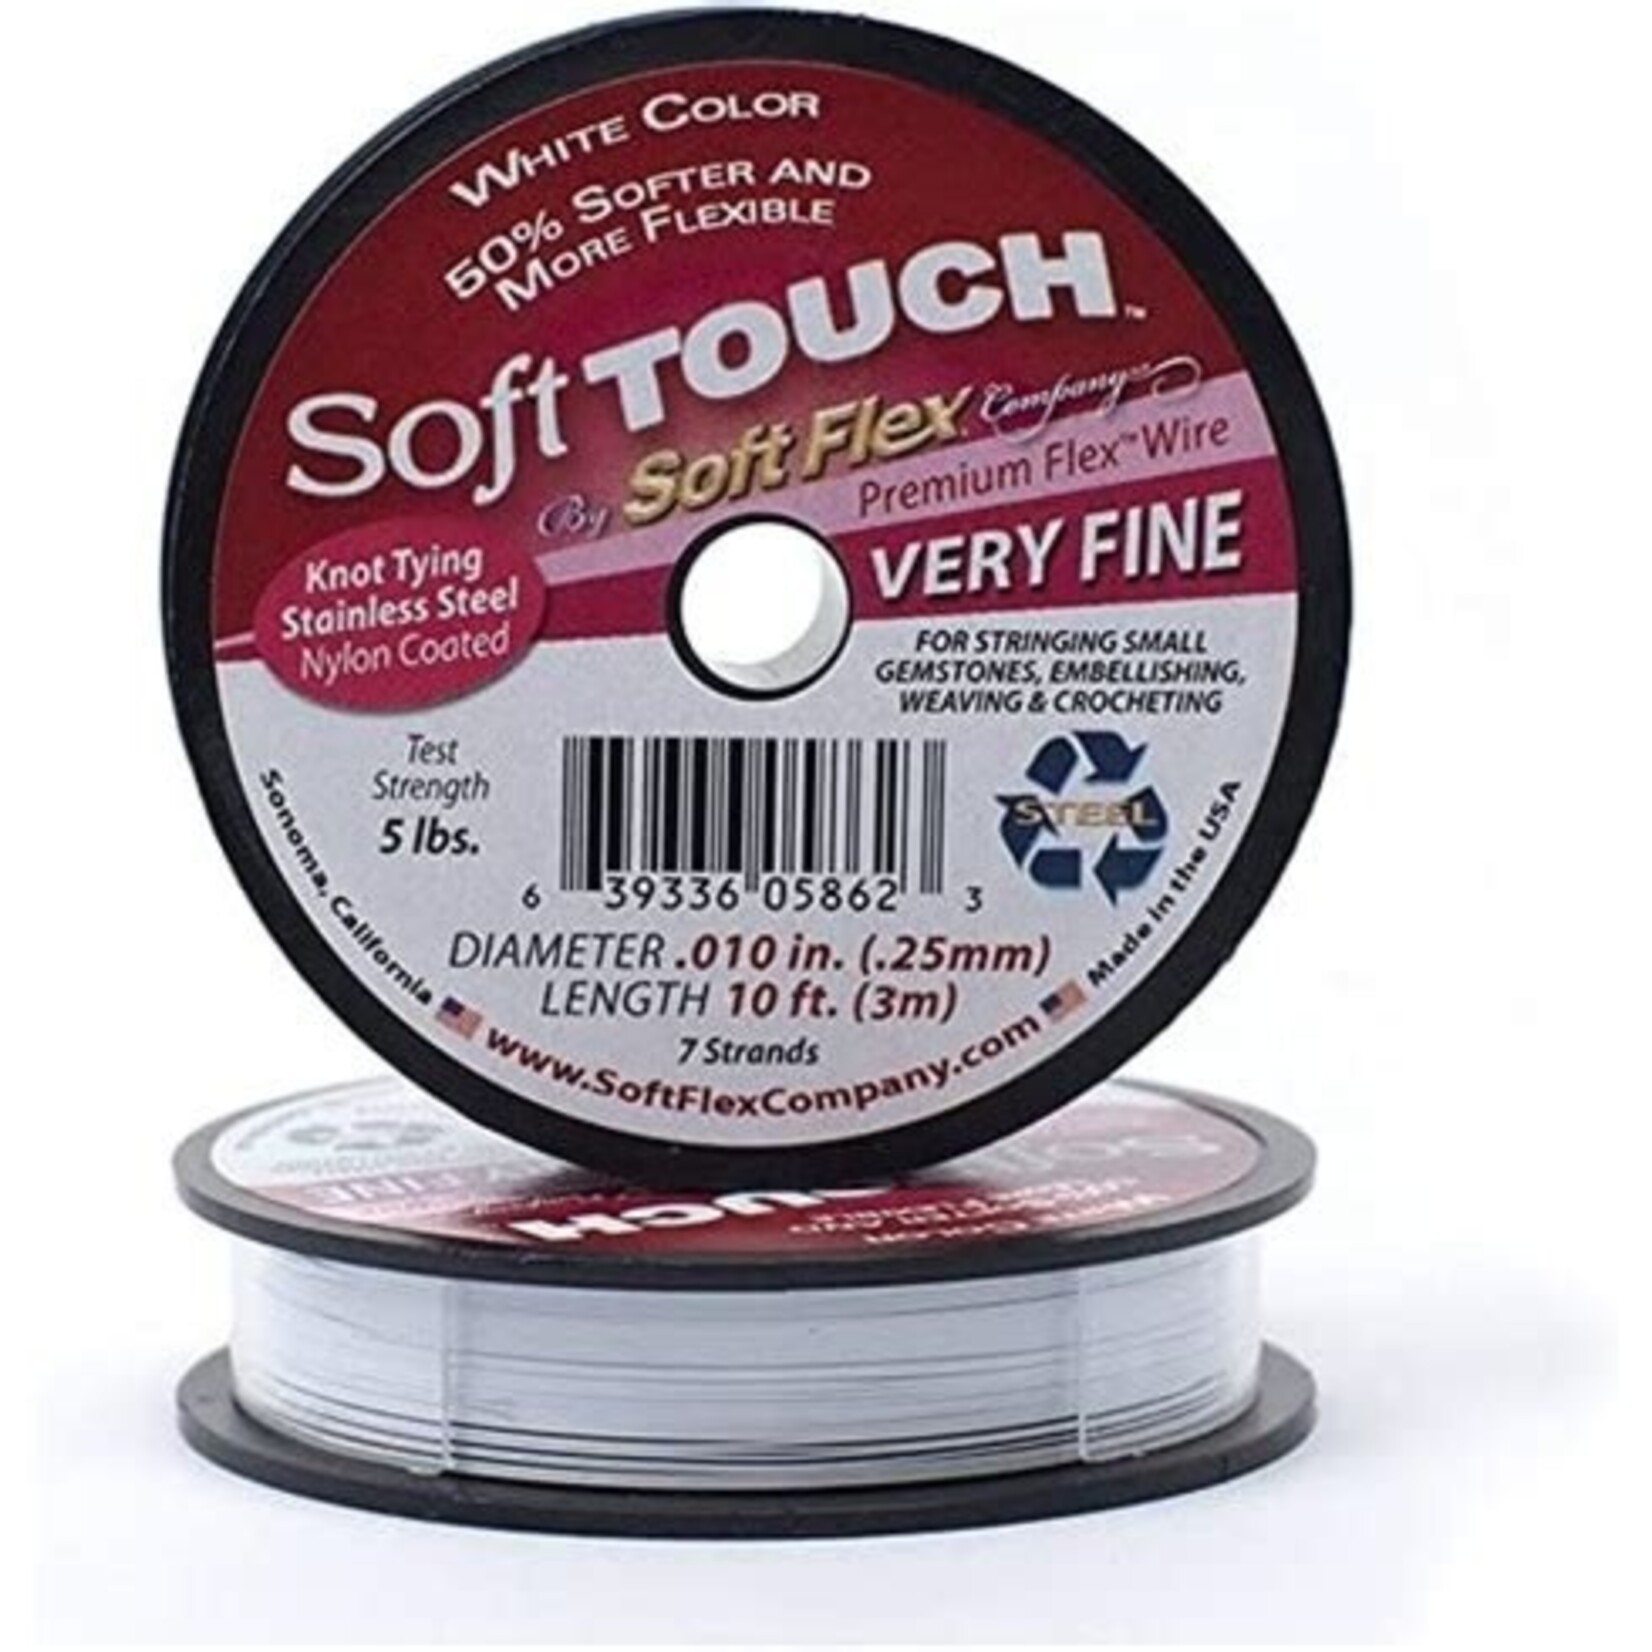 Softflex SoftTouch Very Fine White Beading Wire - .010in Diameter, 10 feet